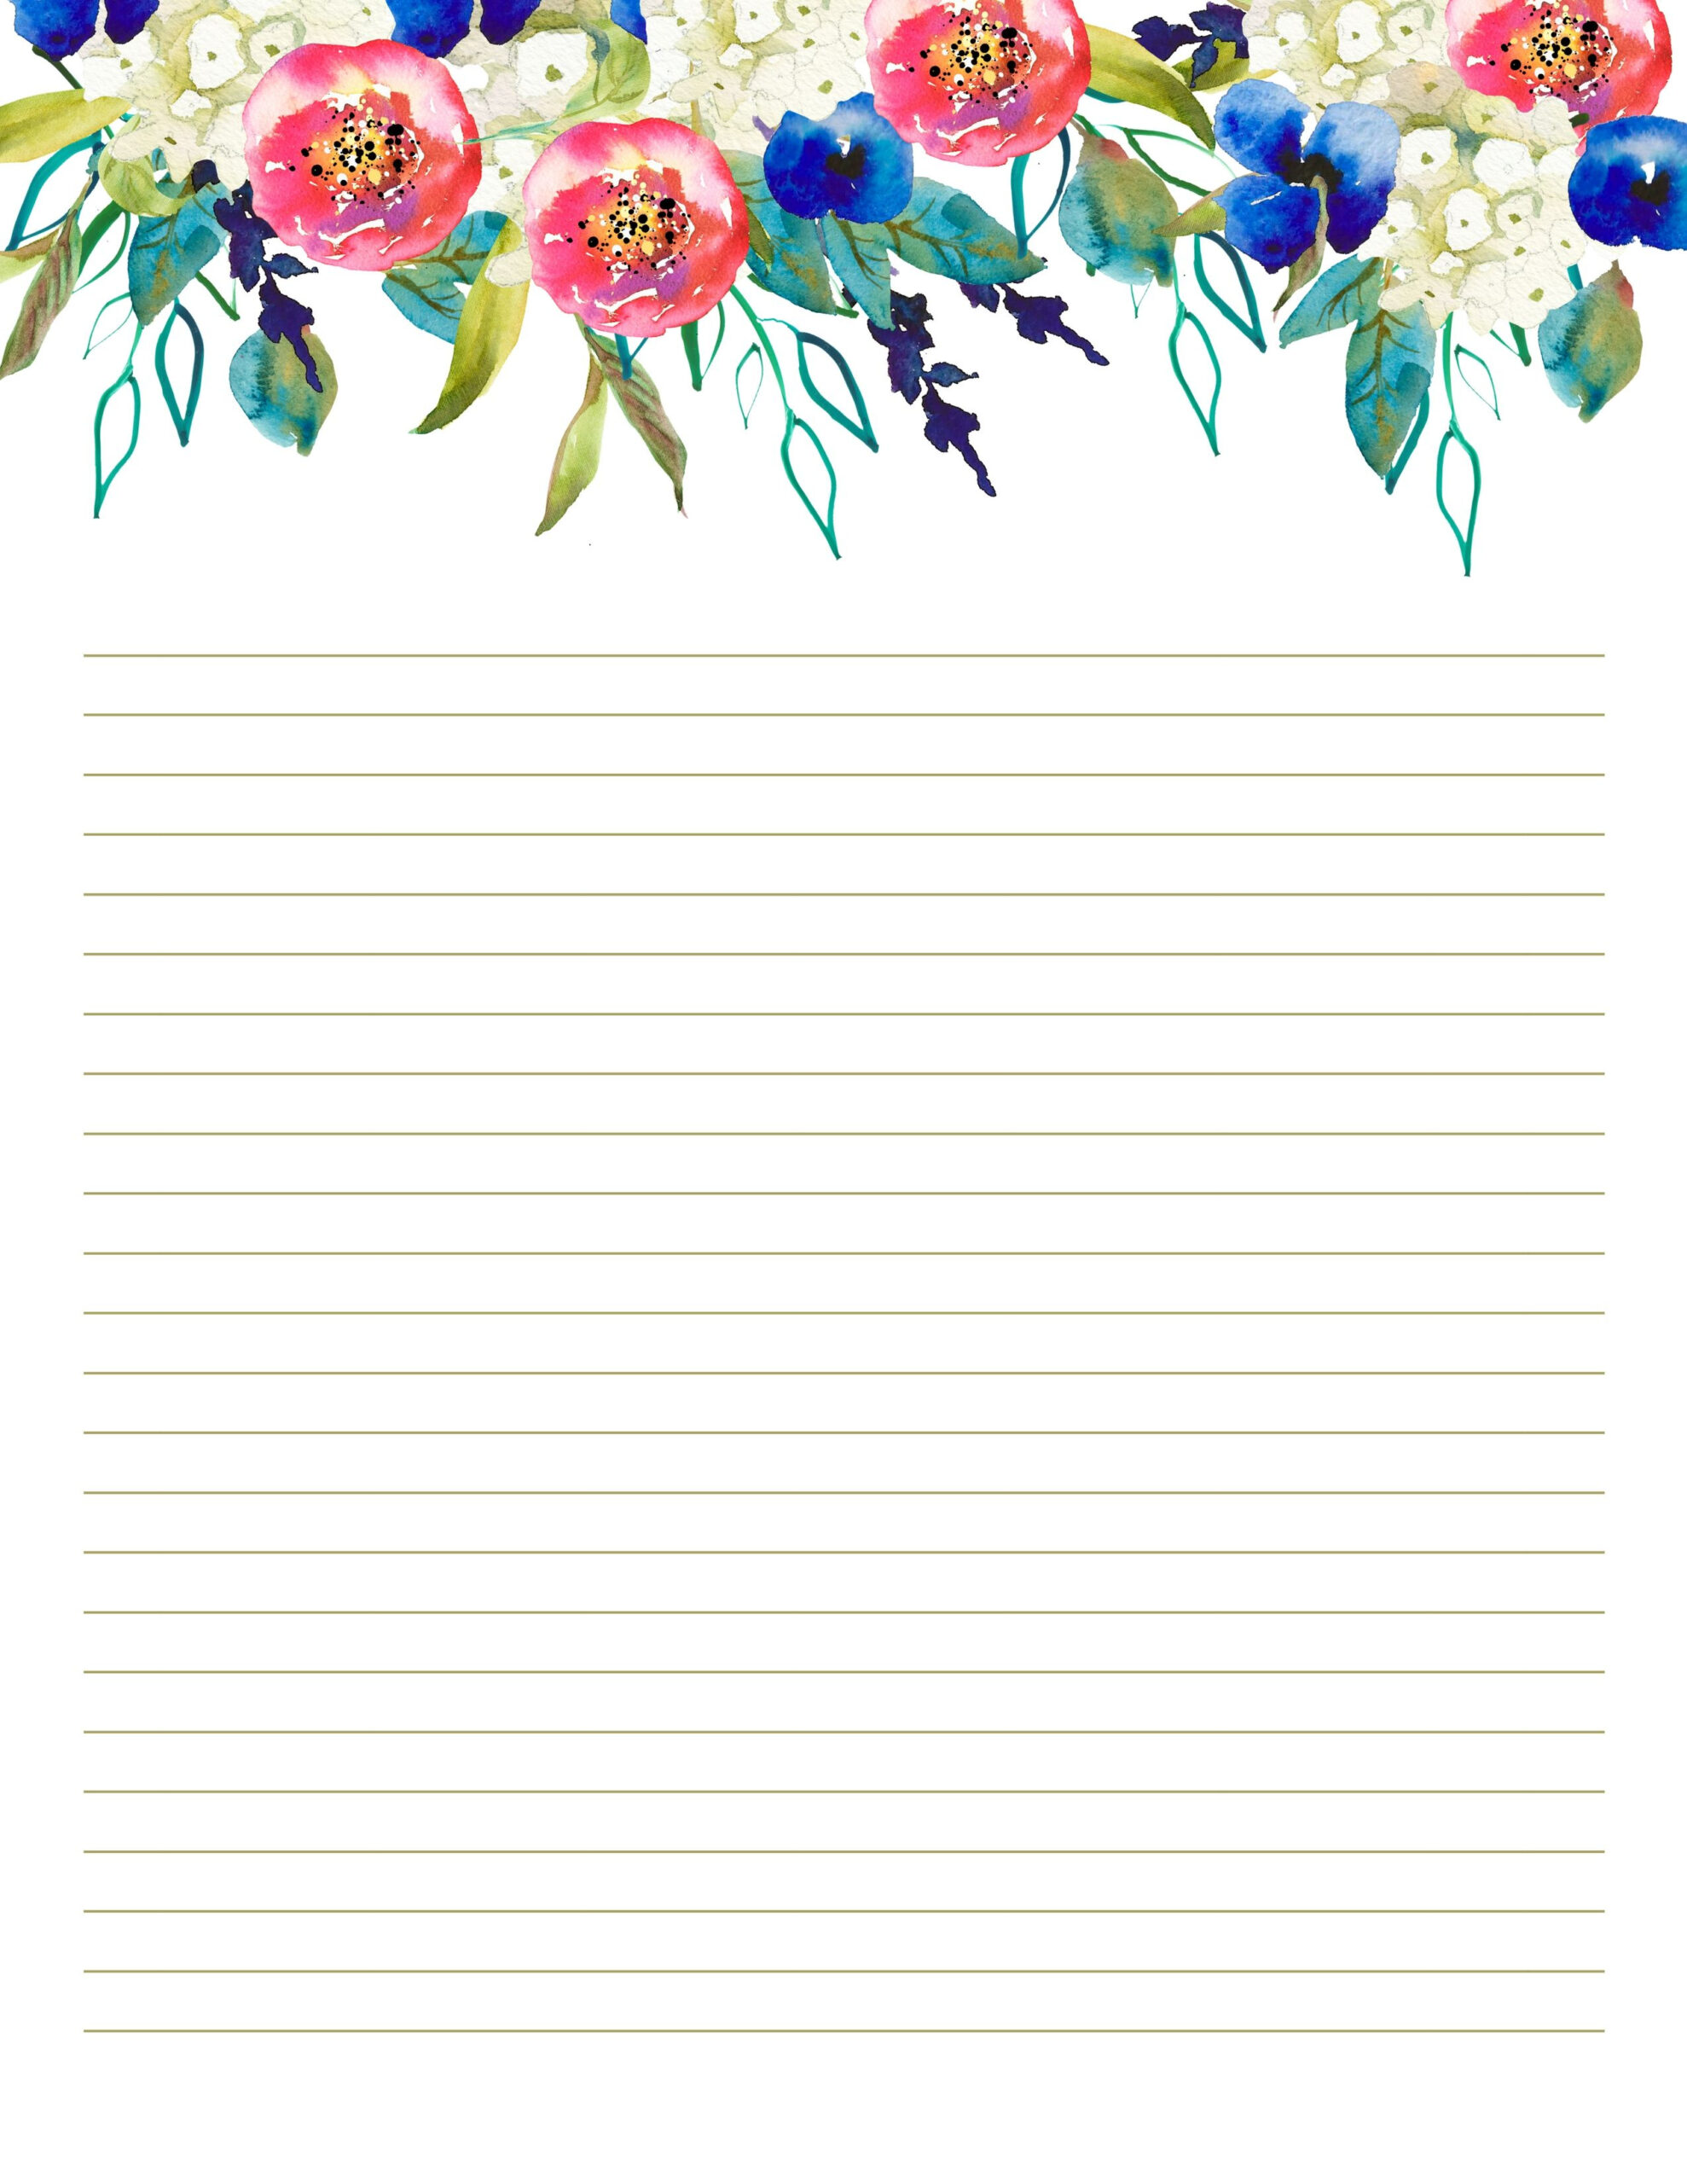 Lined Stationery Paper Free Floral